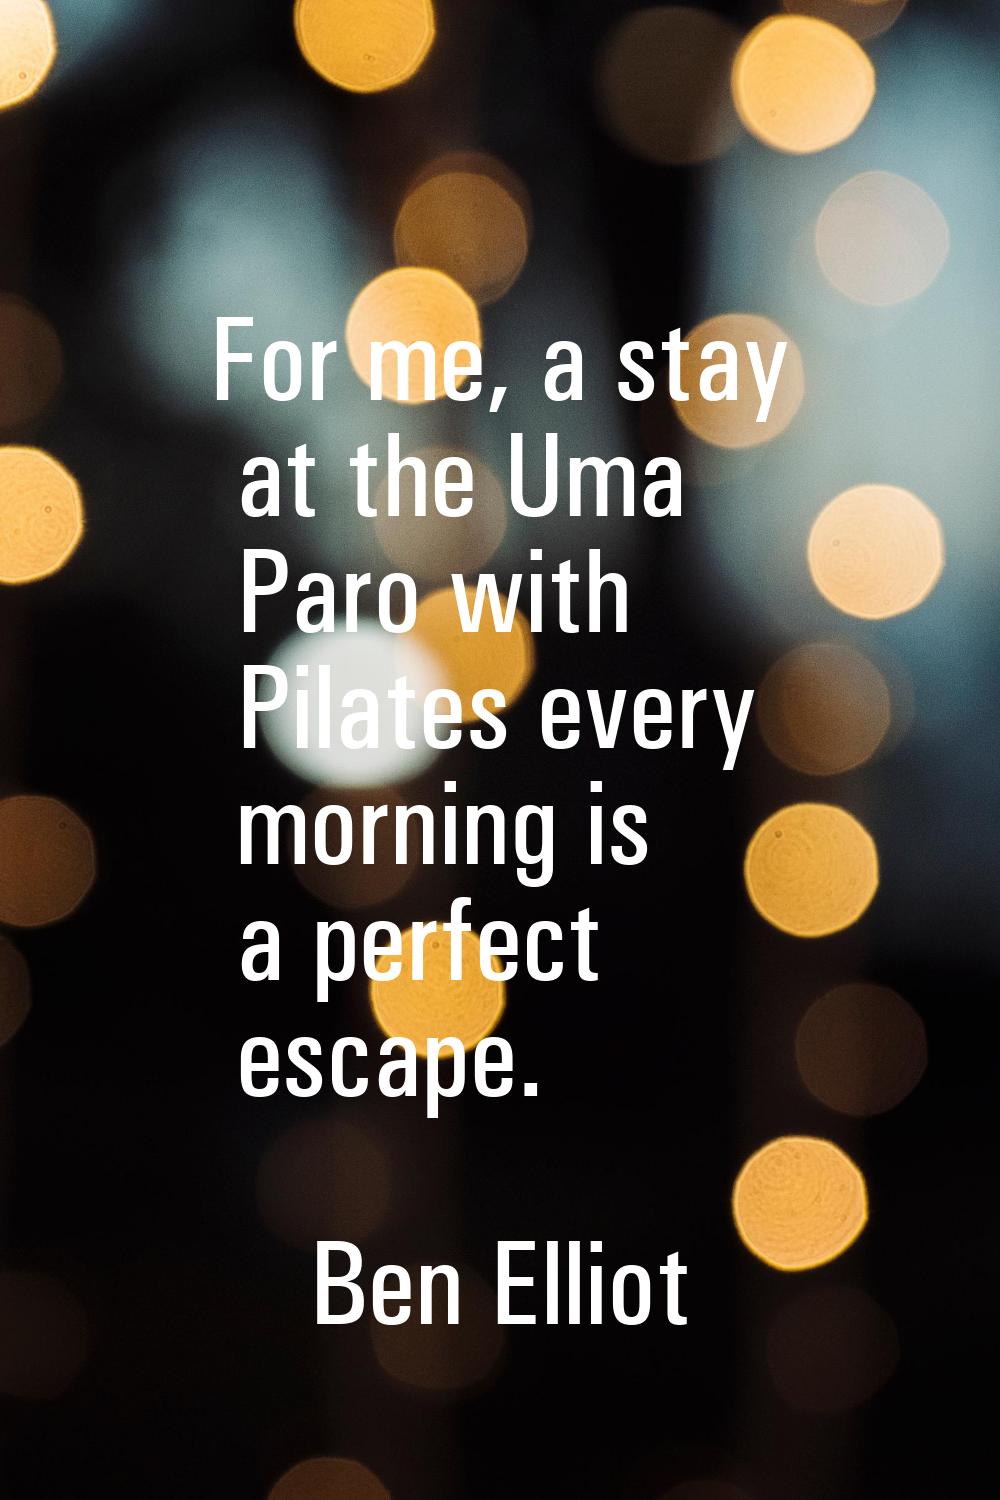 For me, a stay at the Uma Paro with Pilates every morning is a perfect escape.